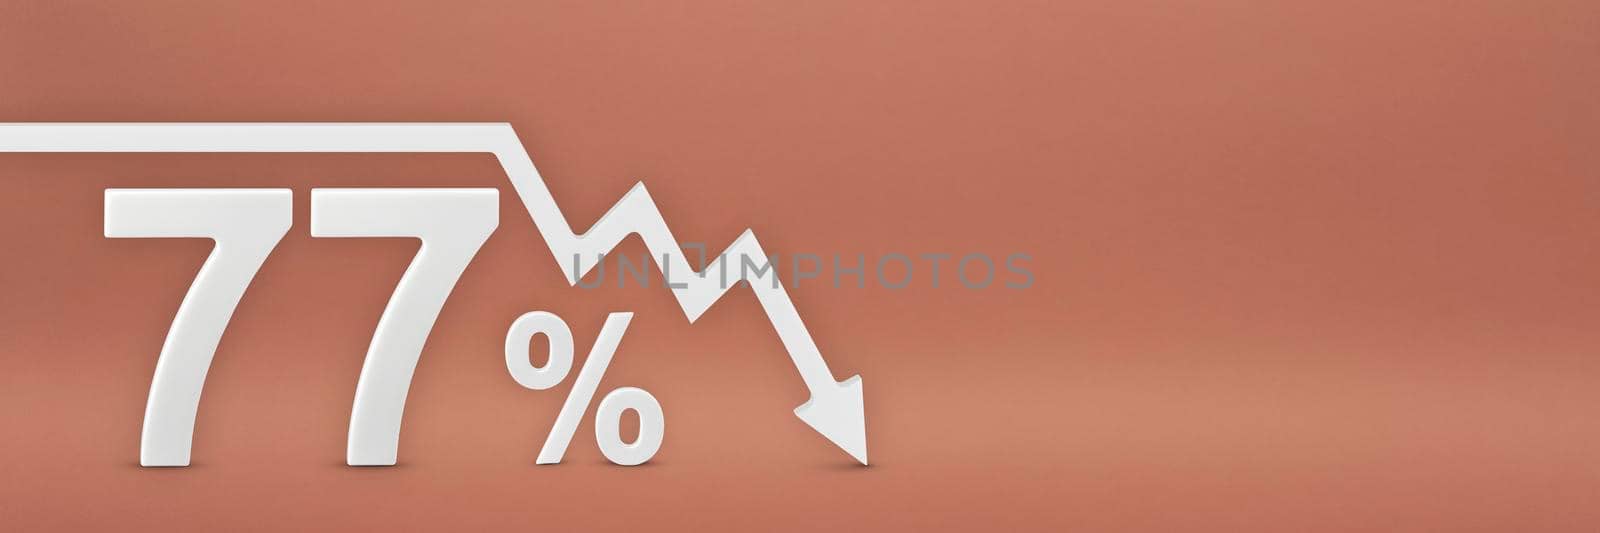 seventy-seven percent, the arrow on the graph is pointing down. Stock market crash, bear market, inflation.Economic collapse, collapse of stocks.3d banner,77 percent discount sign on a red background. by SERSOL